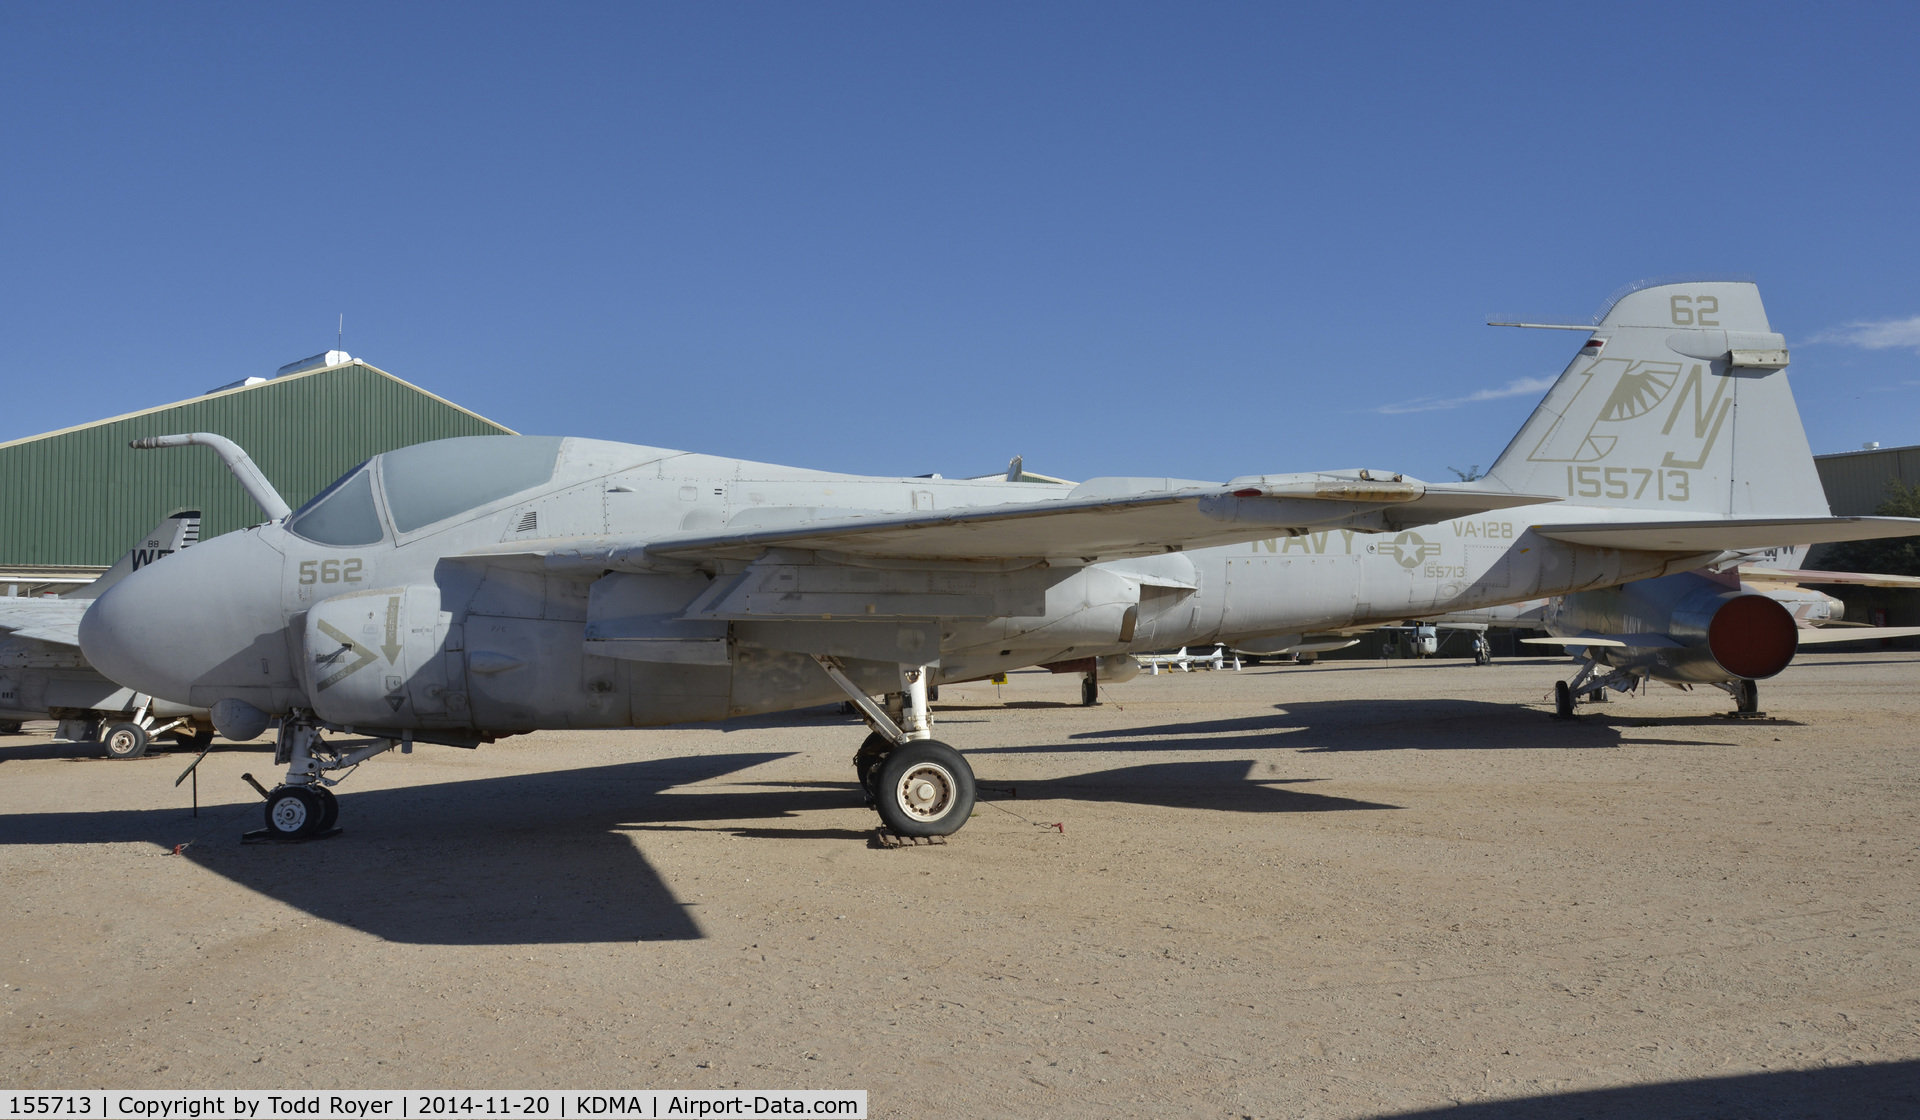 155713, Grumman A-6E Intruder C/N I-439, On display at the Pima Air and Space Museum